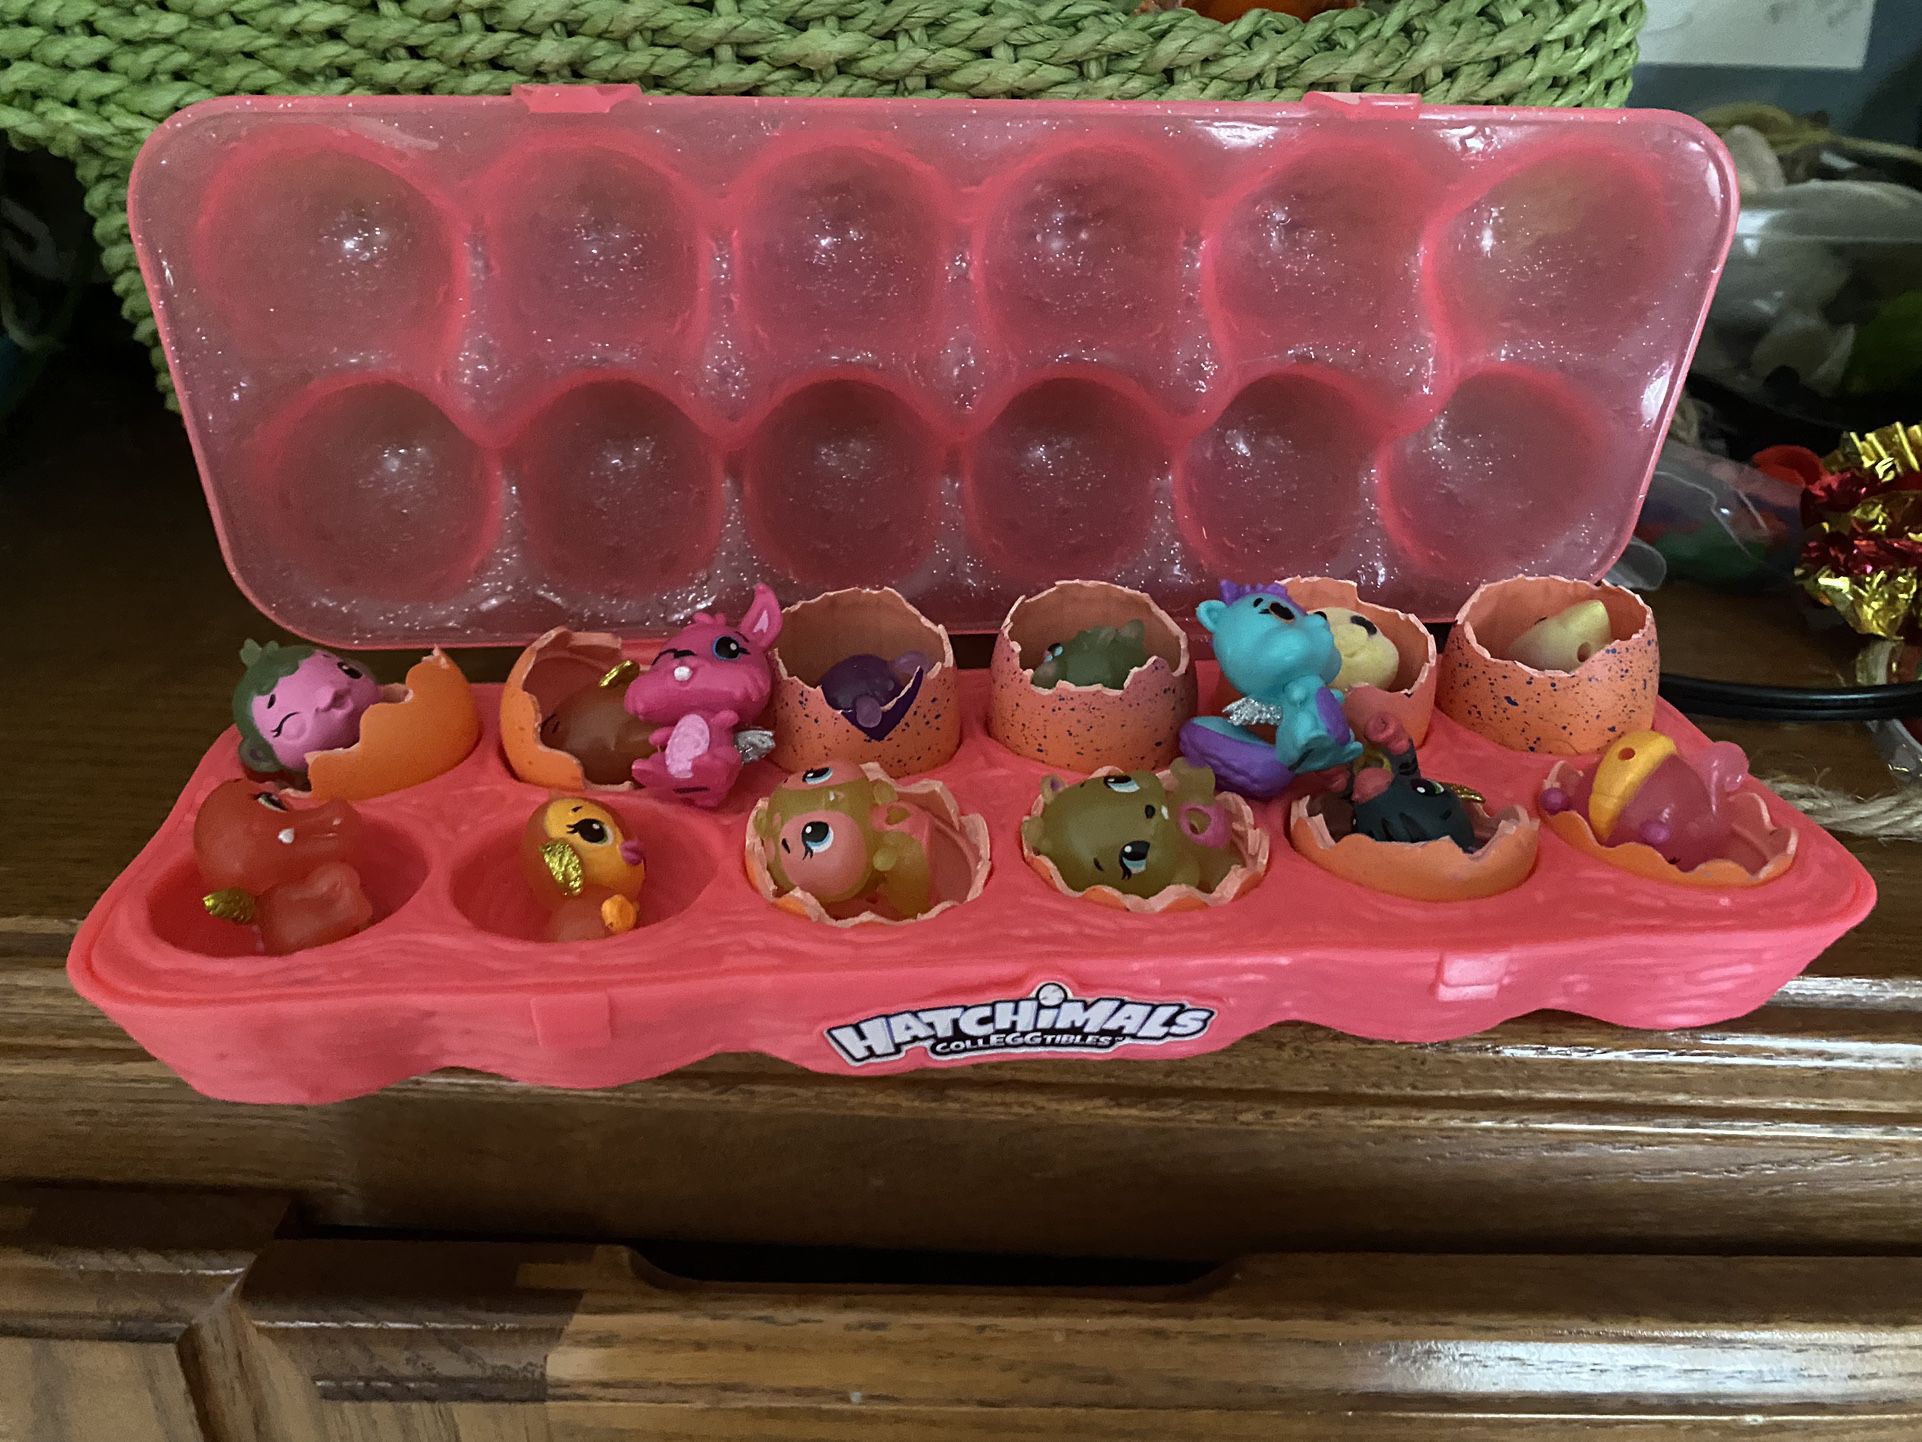 Hatchimals toys with storage container